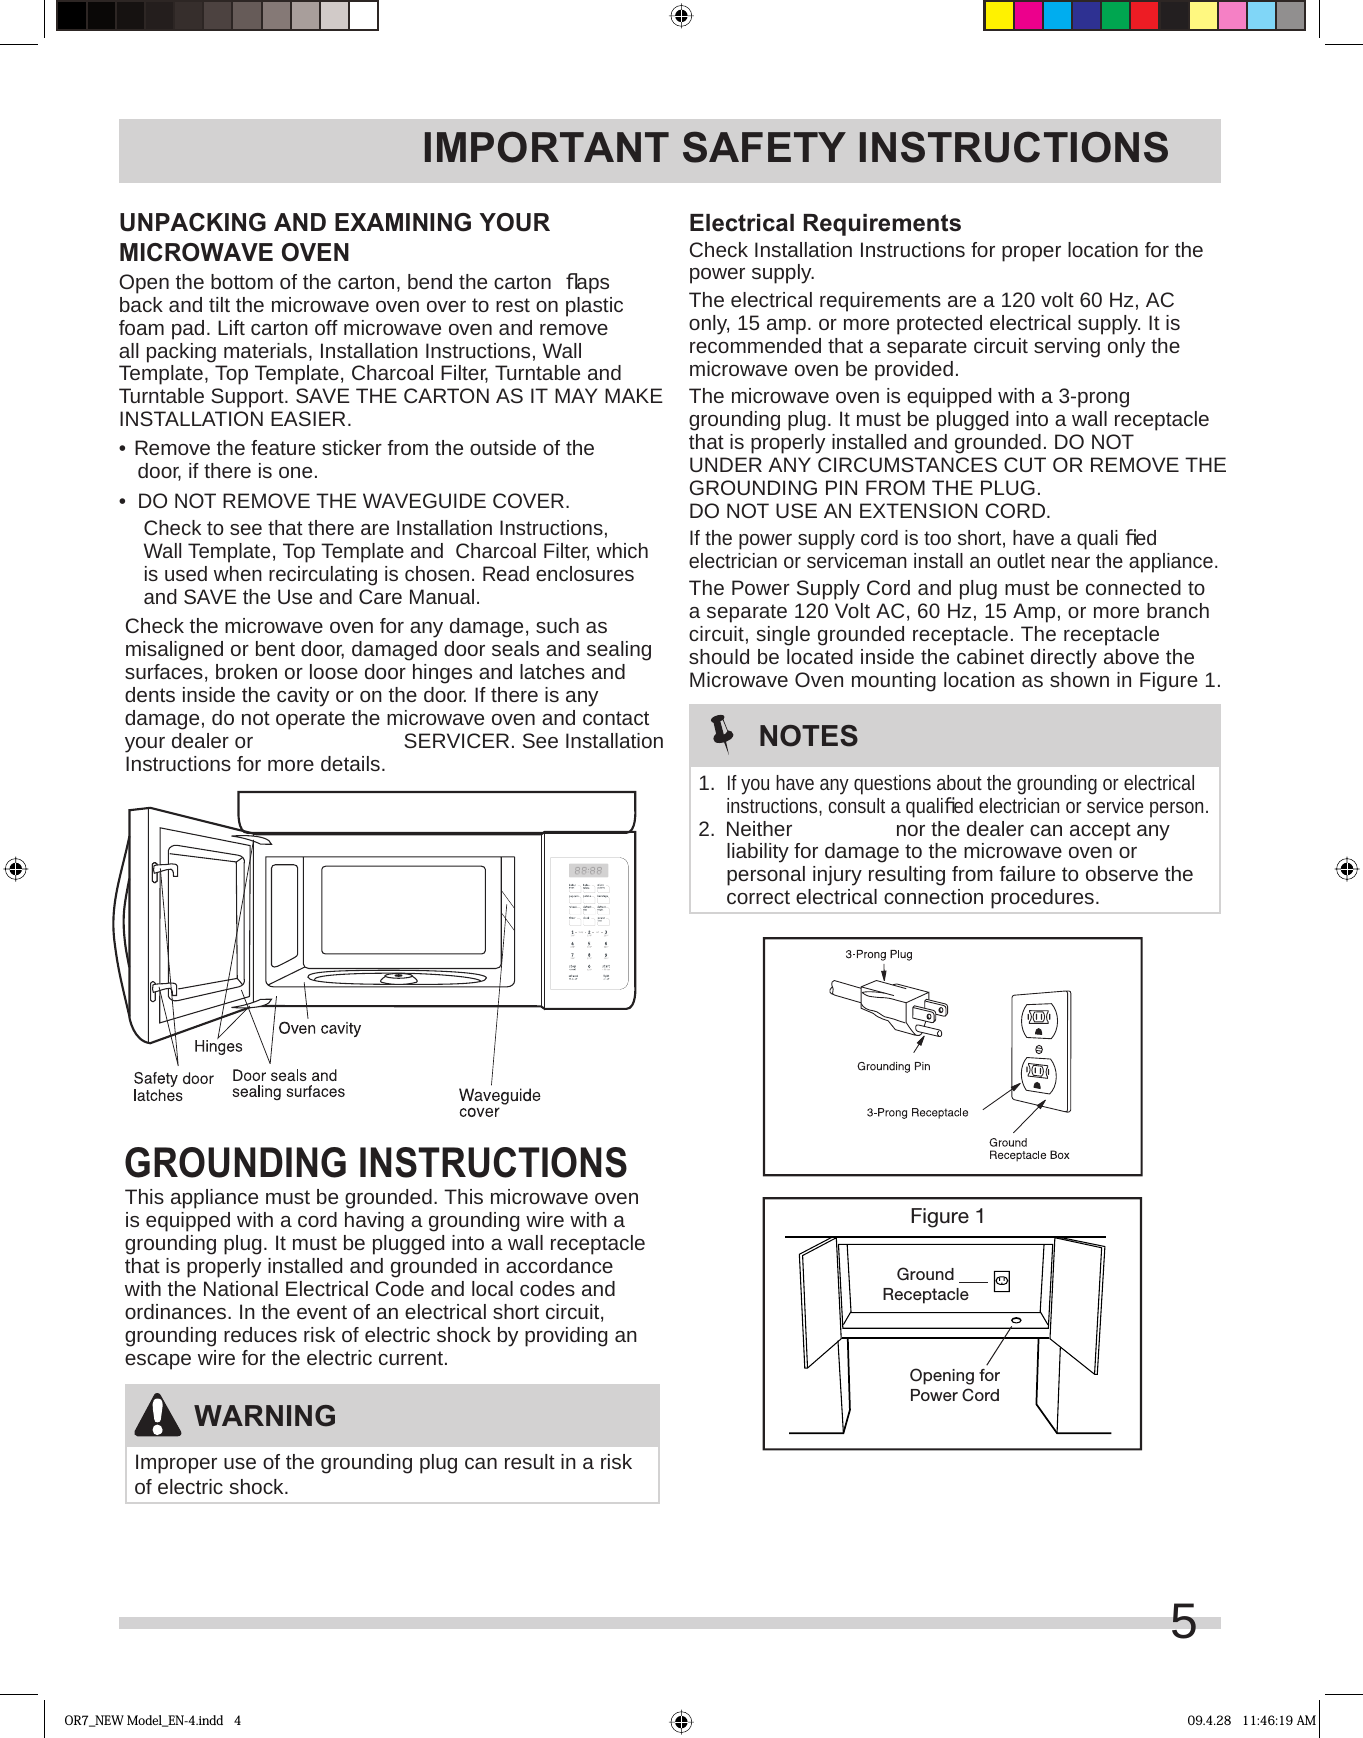 IMPORTANT SAFETY INSTRUCTIONSElectrical RequirementsCheck Installation Instructions for proper location for the power supply.The electrical requirements are a 120 volt 60 Hz, AC only, 15 amp. or more protected electrical supply. It is recommended that a separate circuit serving only the microwave oven be provided.The microwave oven is equipped with a 3-prong grounding plug. It must be plugged into a wall receptacle that is properly installed and grounded. DO NOT UNDER ANY CIRCUMSTANCES CUT OR REMOVE THE GROUNDING PIN FROM THE PLUG. DO NOT USE AN EXTENSION CORD.If the power supply cord is too short, have a quali ﬁ ed electrician or serviceman install an outlet near the appliance.The Power Supply Cord and plug must be connected to a separate 120 Volt AC, 60 Hz, 15 Amp, or more branch circuit, single grounded receptacle. The receptacle should be located inside the cabinet directly above the Microwave Oven mounting location as shown in Figure 1.Figure 1GroundReceptacleOpening forPower CordWARNINGImproper use of the grounding plug can result in a risk of electric shock.NOTES1. If you have any questions about the grounding or electrical instructions, consult a qualiﬁ ed electrician or service person.2.  Neither  nor the dealer can accept any liability for damage to the microwave oven or personal injury resulting from failure to observe the correct electrical connection procedures.GROUNDING INSTRUCTIONSThis appliance must be grounded. This microwave oven is equipped with a cord having a grounding wire with a grounding plug. It must be plugged into a wall receptacle that is properly installed and grounded in accordance with the National Electrical Code and local codes and ordinances. In the event of an electrical short circuit, grounding reduces risk of electric shock by providing an escape wire for the electric current.UNPACKING AND EXAMINING YOUR MICROWAVE OVENOpen the bottom of the carton, bend the carton  ﬂ aps back and tilt the microwave oven over to rest on plastic foam pad. Lift carton off microwave oven and remove all packing materials, Installation Instructions, Wall Template, Top Template, Charcoal Filter, Turntable and Turntable Support. SAVE THE CARTON AS IT MAY MAKE INSTALLATION EASIER.•  Remove the feature sticker from the outside of the door, if there is one.•  DO NOT REMOVE THE WAVEGUIDE COVER.Check to see that there are Installation Instructions, Wall Template, Top Template and  Charcoal Filter, which is used when recirculating is chosen. Read enclosures and SAVE the Use and Care Manual.Check the microwave oven for any damage, such as misaligned or bent door, damaged door seals and sealing surfaces, broken or loose door hinges and latches and dents inside the cavity or on the door. If there is any damage, do not operate the microwave oven and contact your dealer or  SERVICER. See Installation Instructions for more details.OR7_NEW Model_EN-4.indd   4 09.4.28   11:46:19 AM5